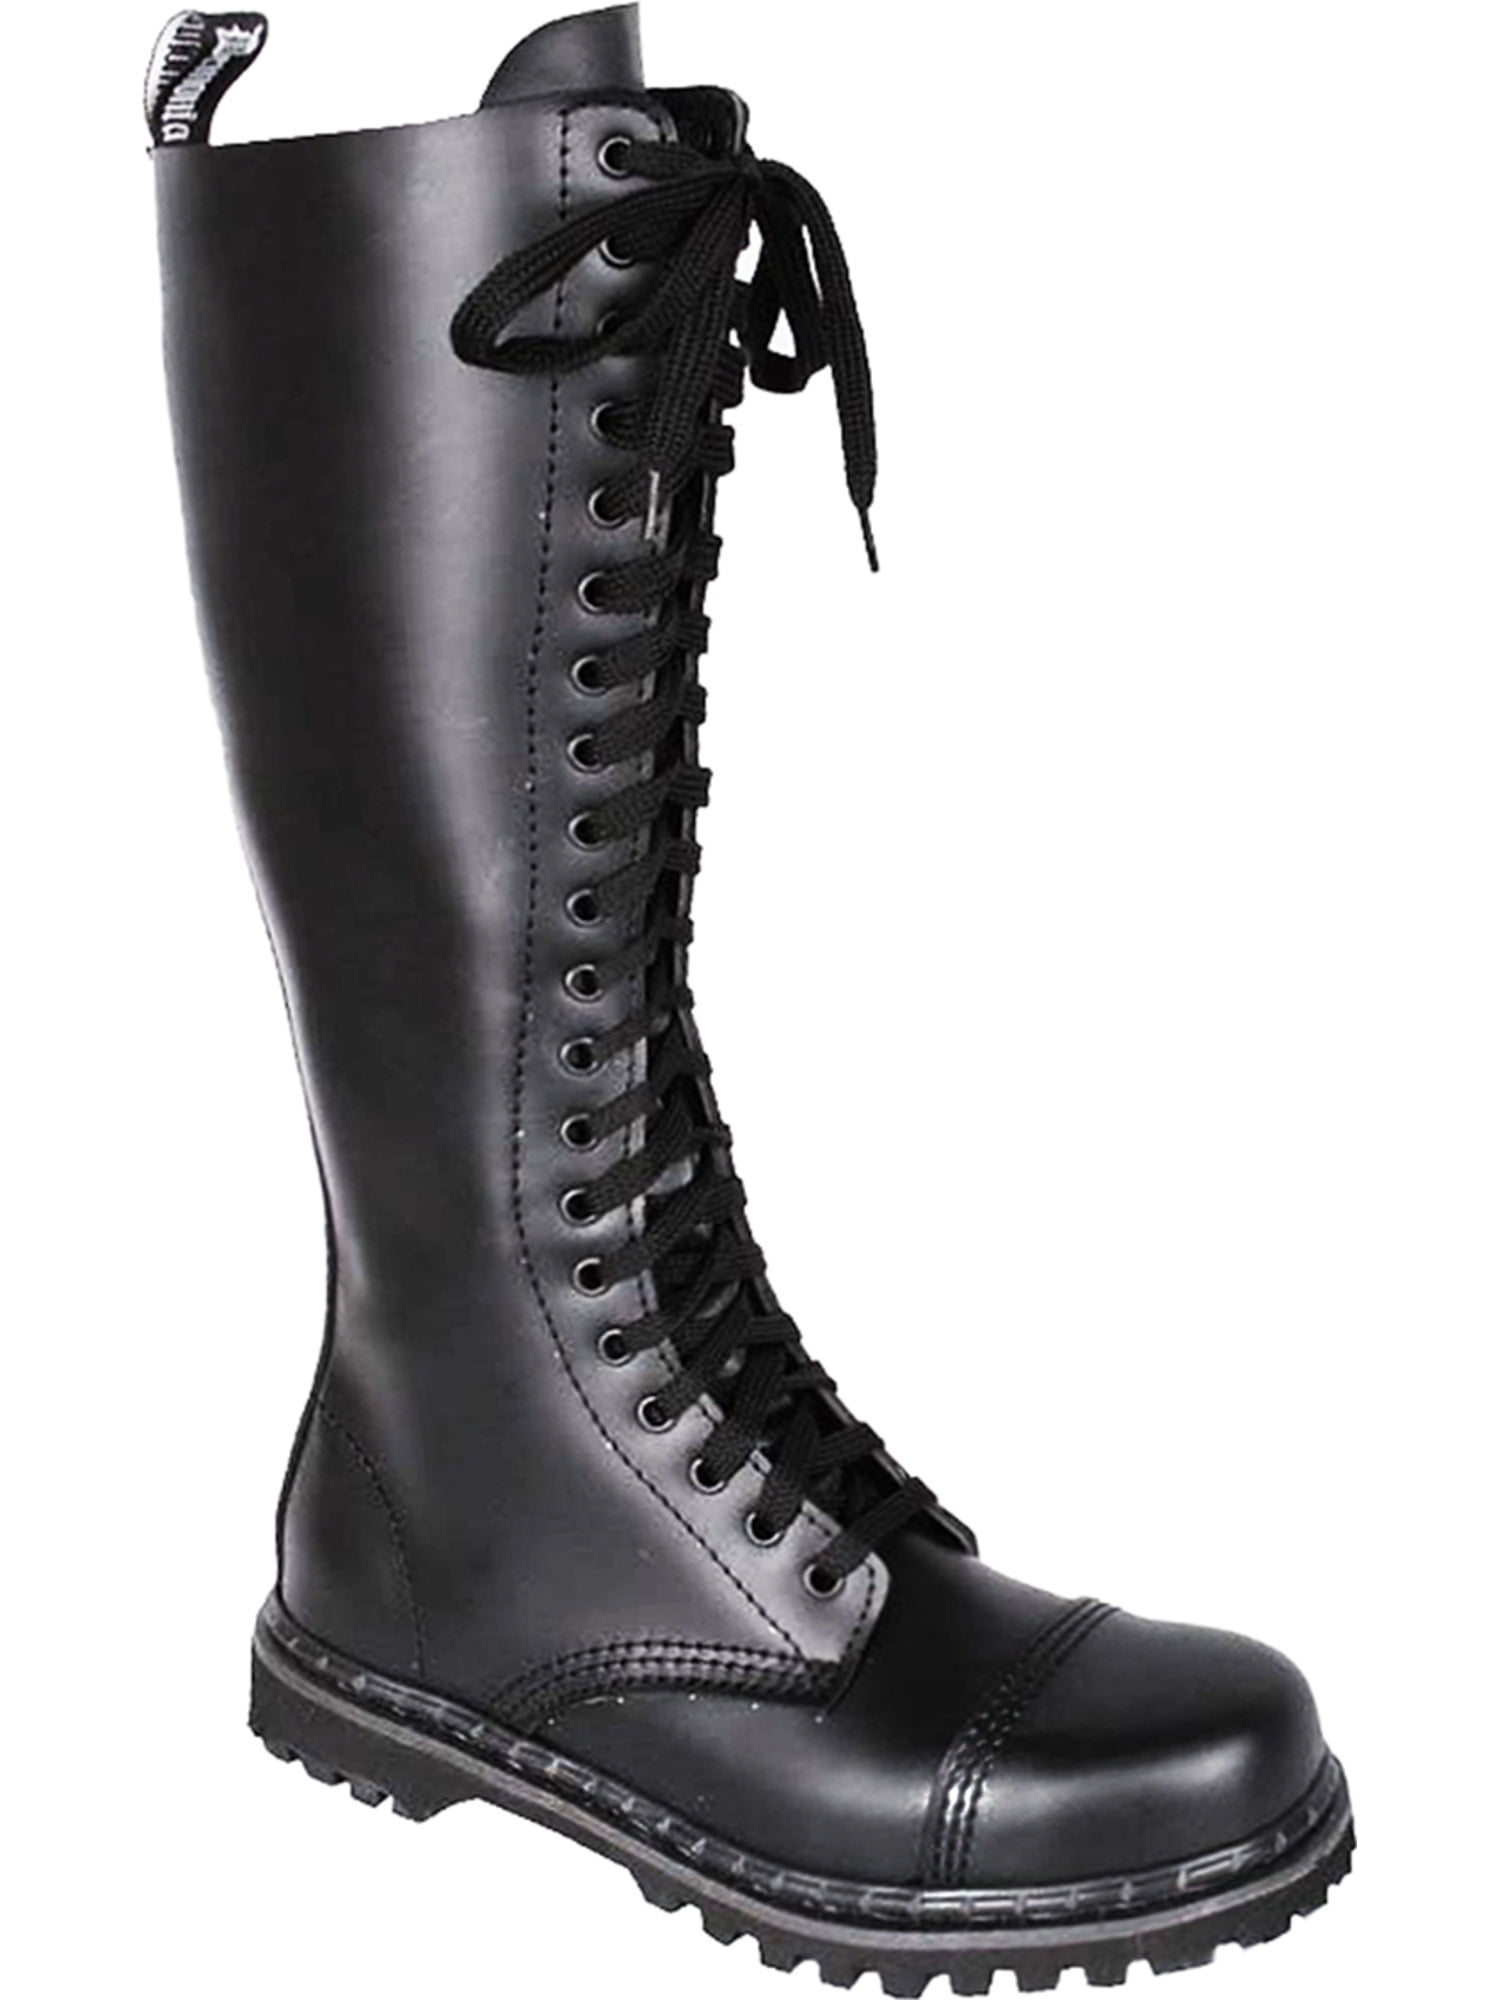 SummitFashions - Mens Gothic Boots Lace Up Knee High Boot Black Leather ...